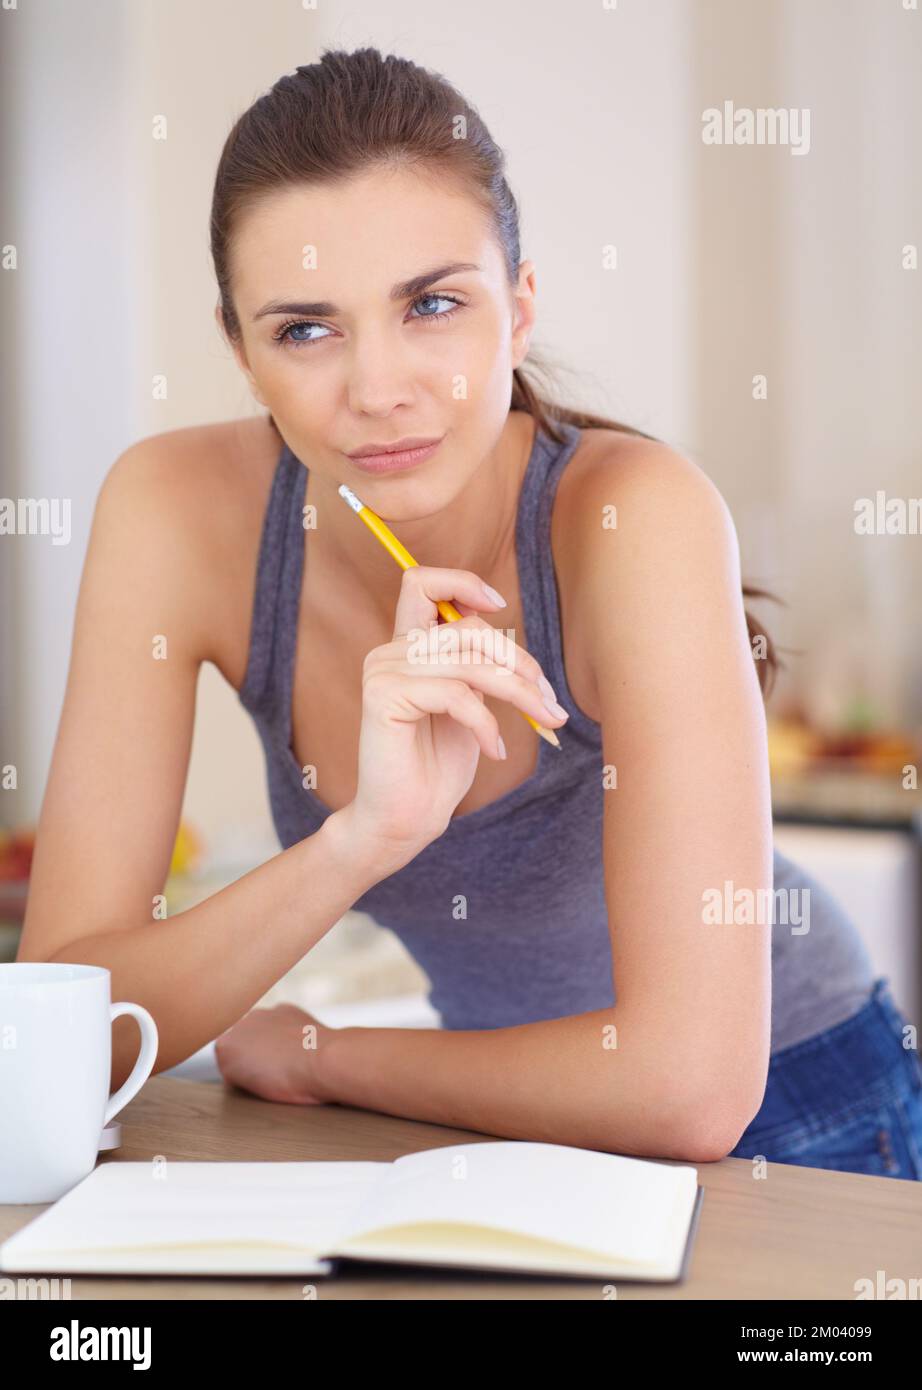 Thinking of the right words...An attractive young woman looking thoughtful while writing in a book. Stock Photo